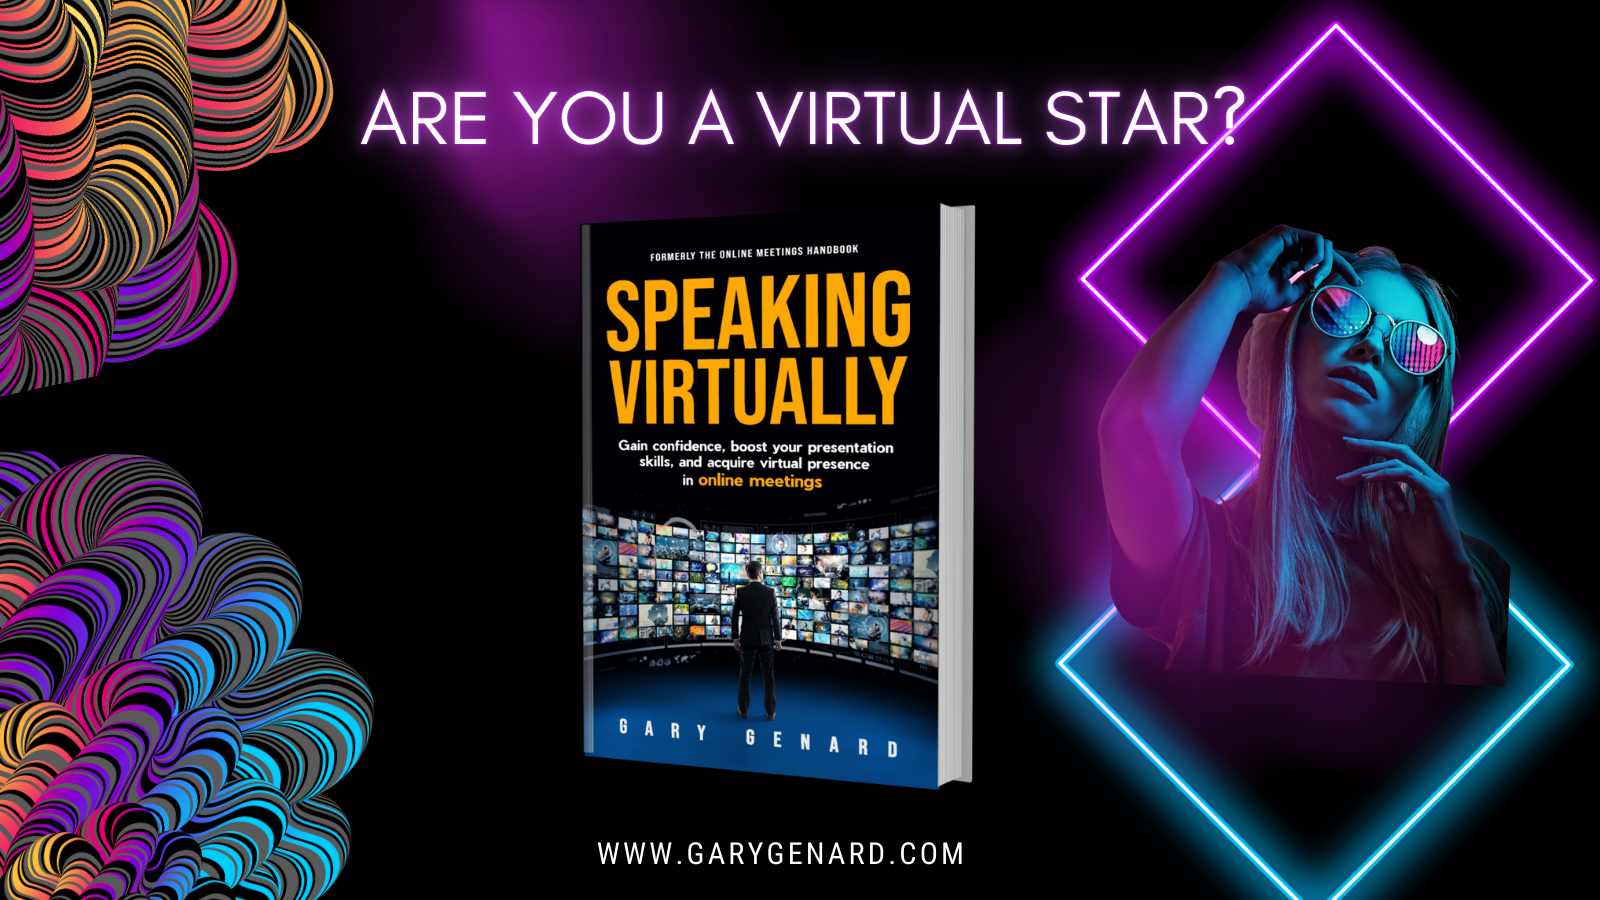 Dr. Gary Genard's book on delivering great virtual presentations, Speaking Virtually.